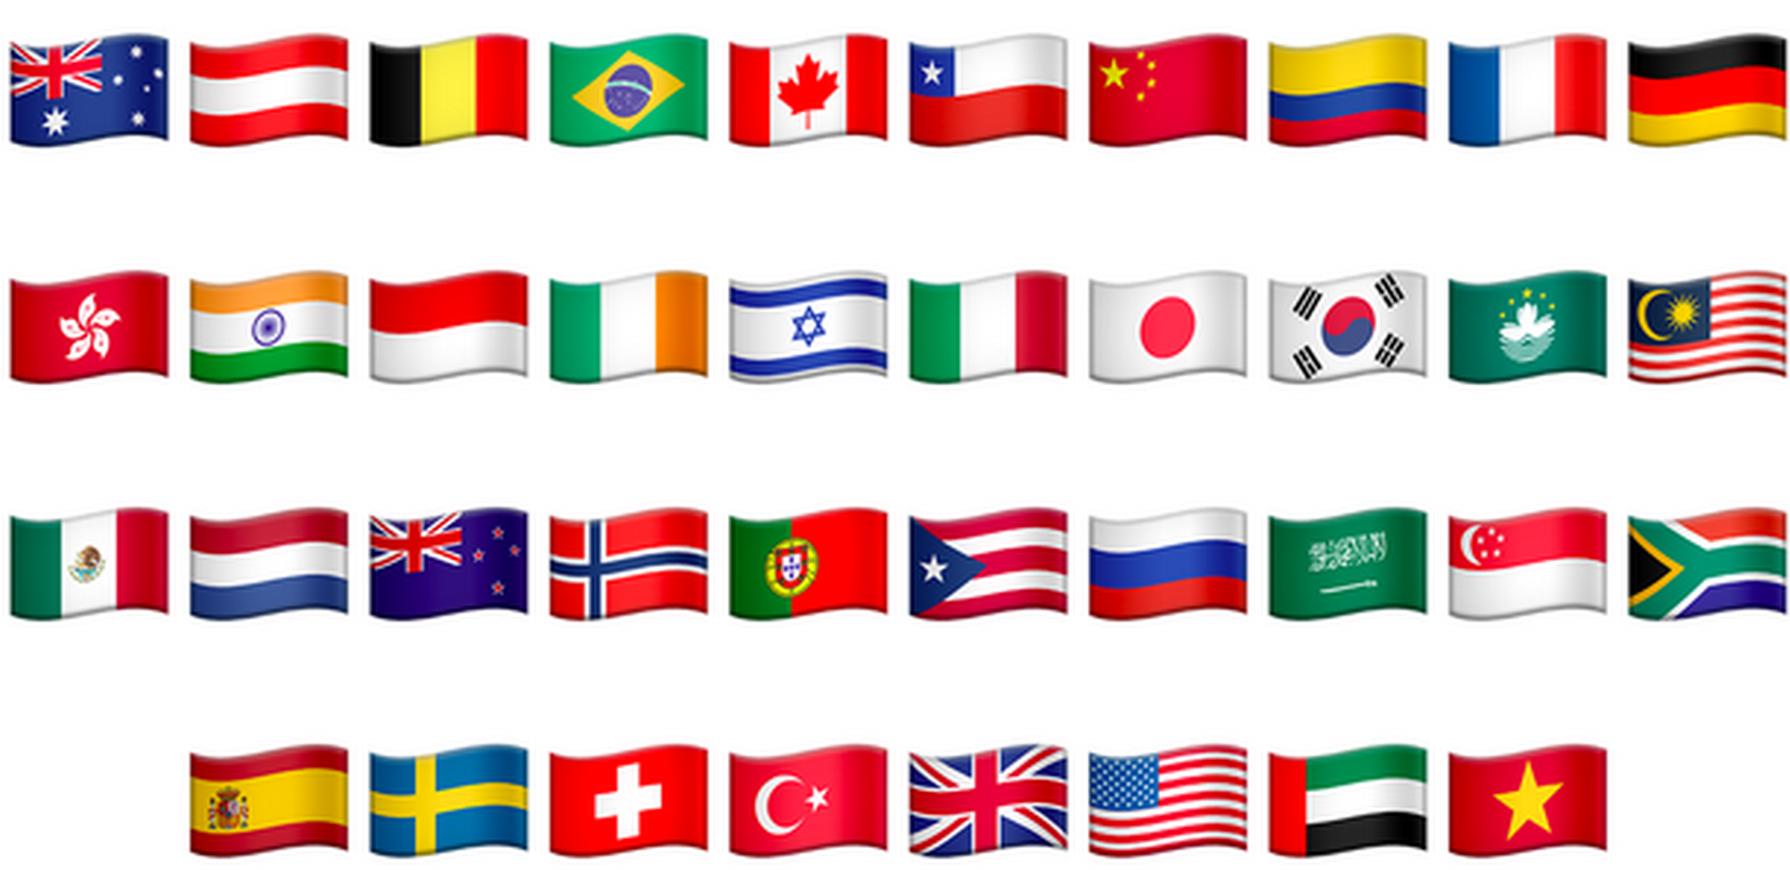 The countries to be represented in the next version of iOS and OS X.